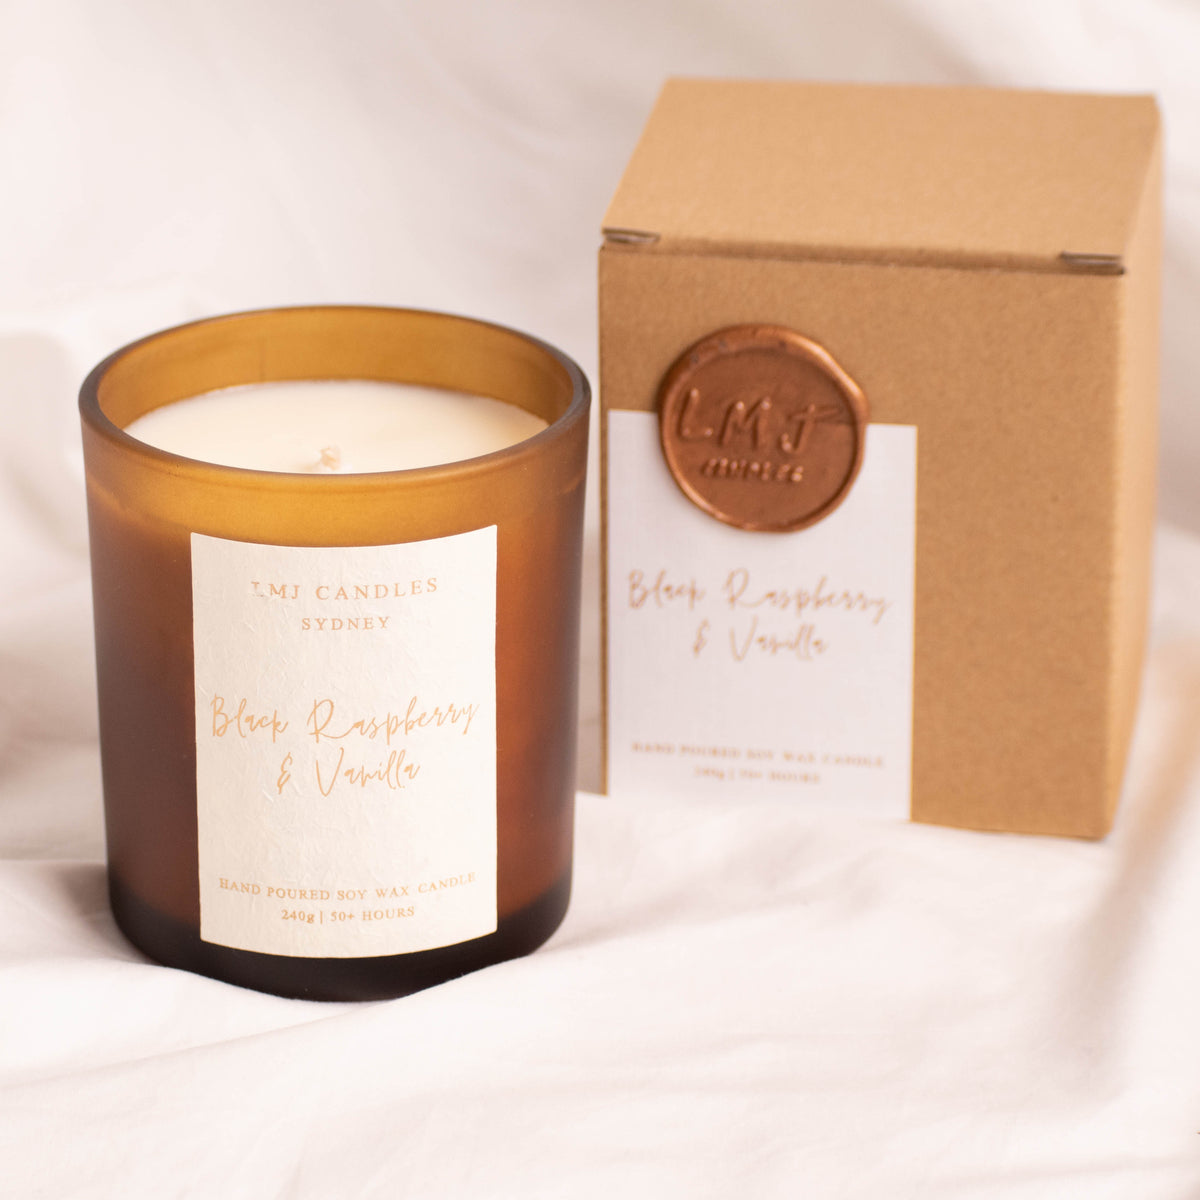 Black Raspberry and Vanilla Natural Soy Candle | LMJ Candles